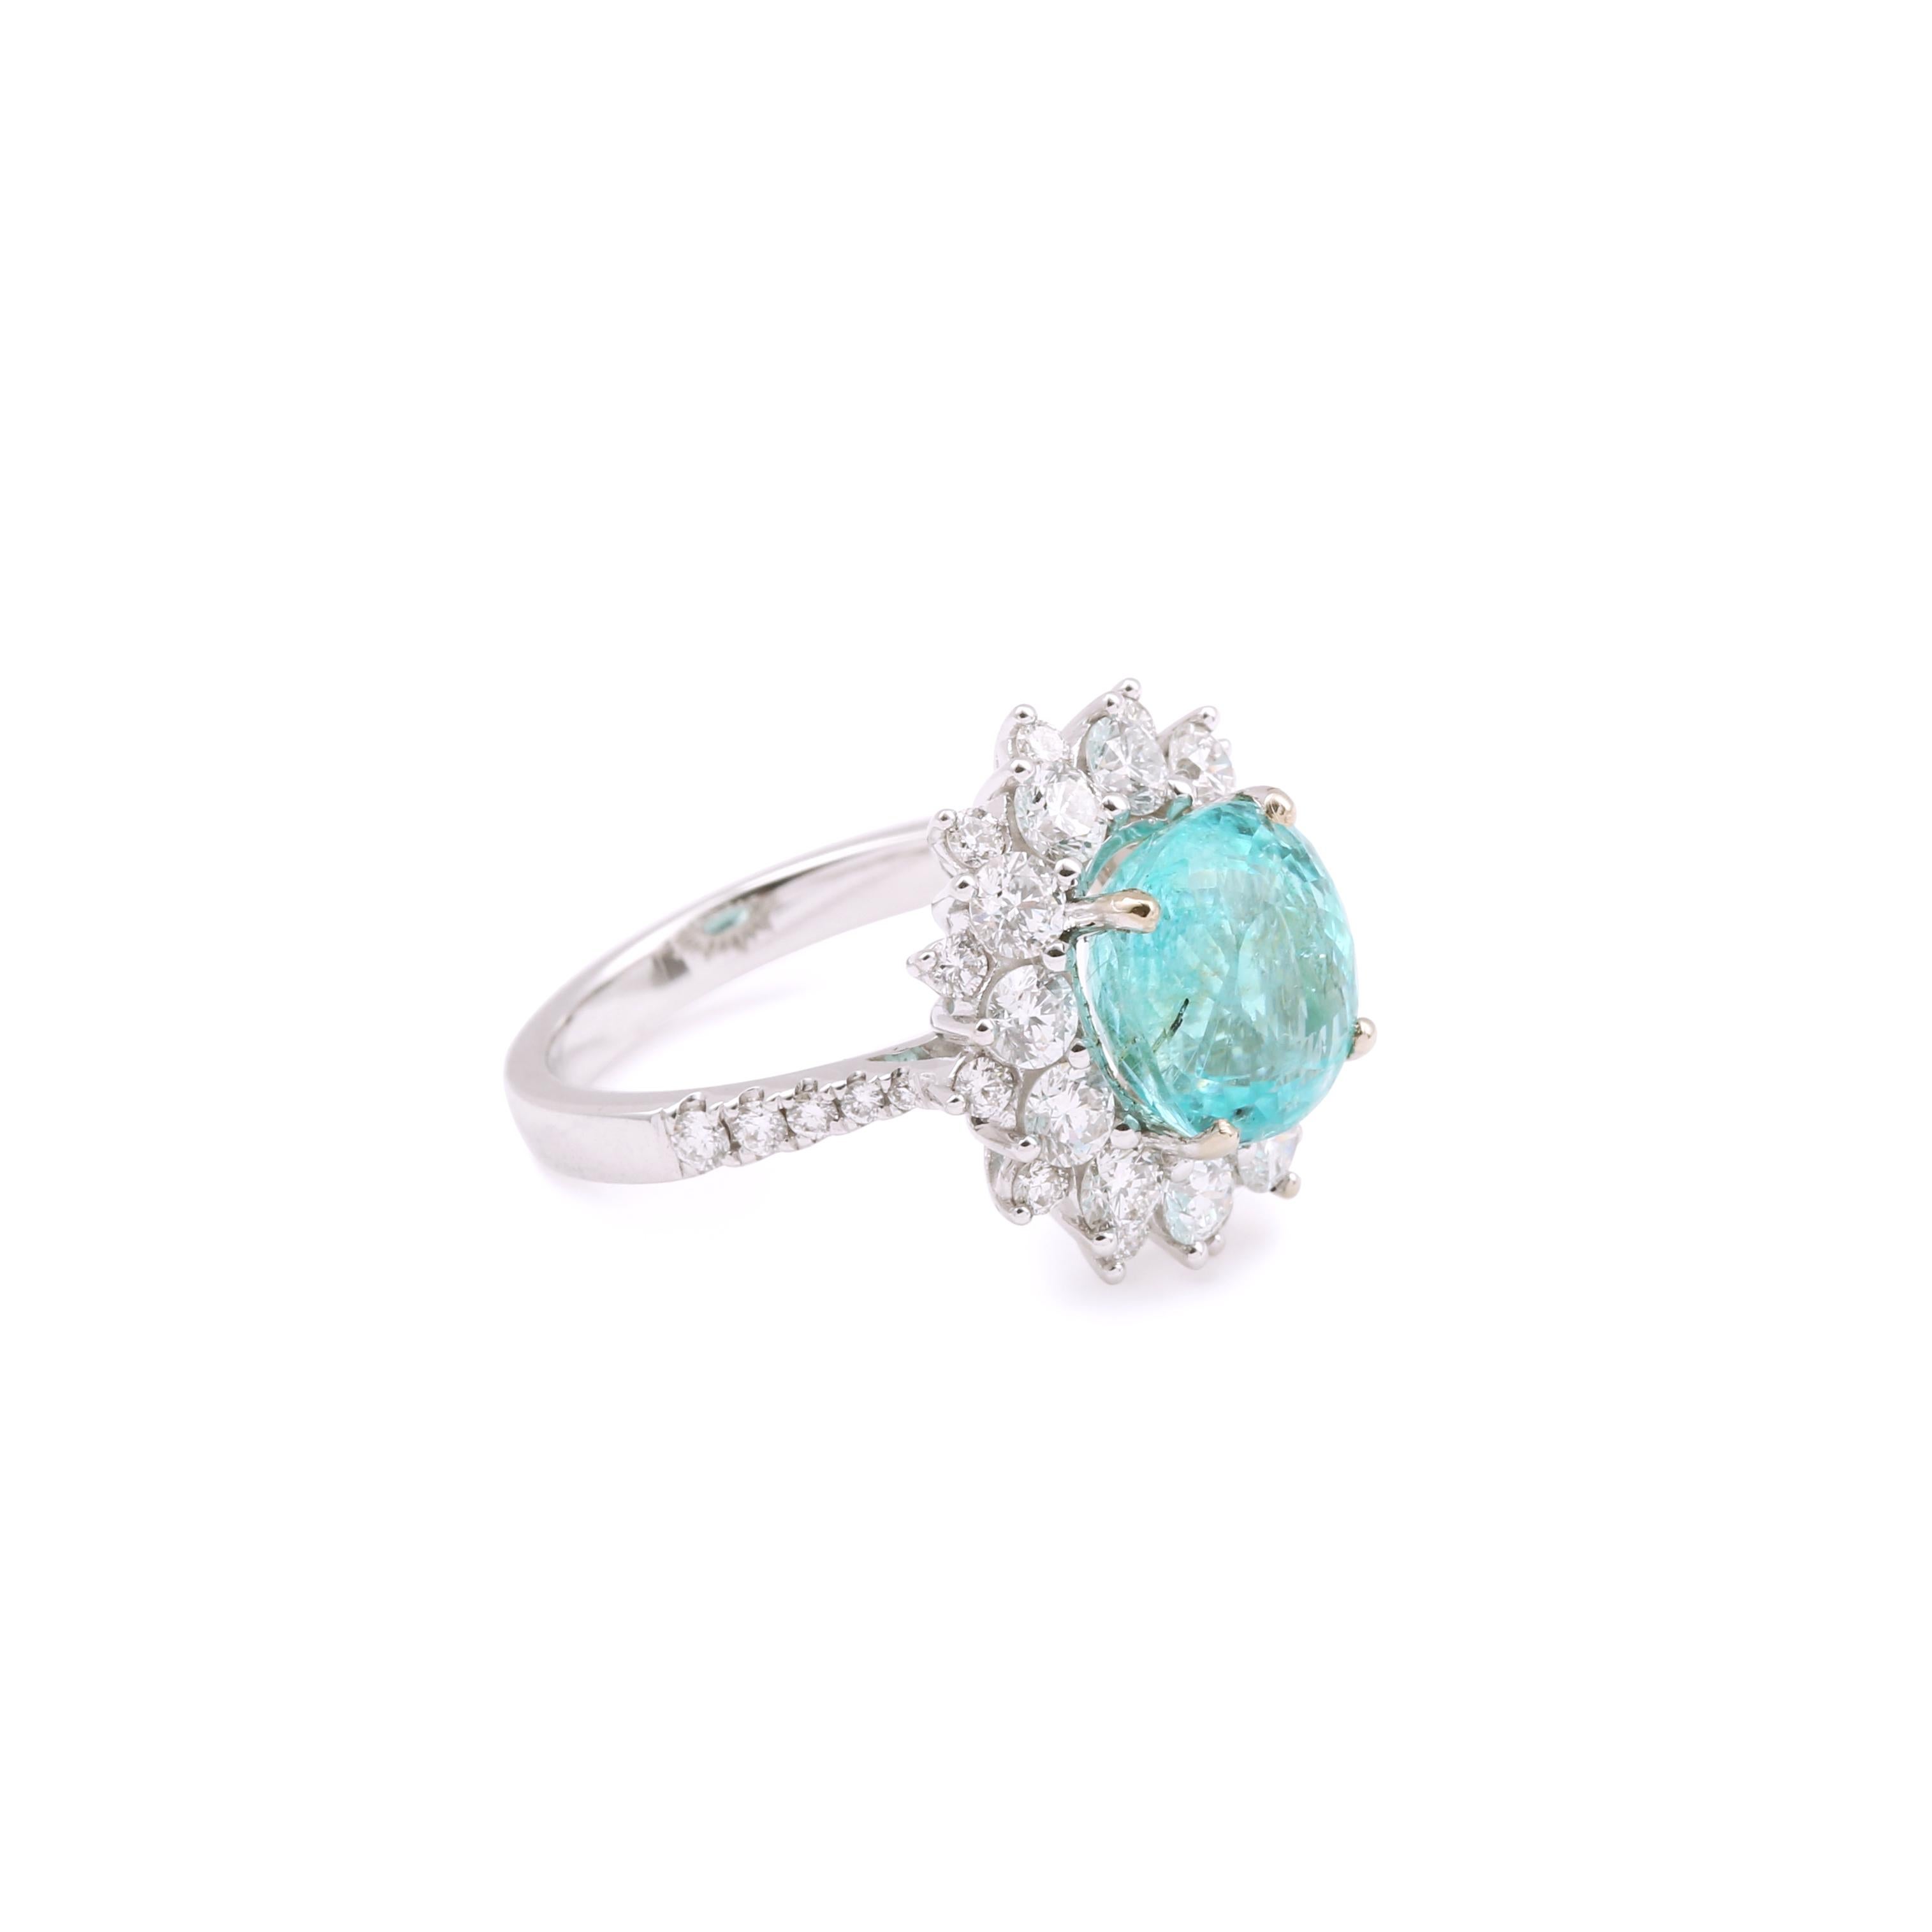 Exceptional ring in 18 carats white gold set with a magnificent cushion-cut Paraiba tourmaline and surrounded by brilliant-cut diamonds.

Tourmaline certified by the Carat Gem Lab.

Ring dimensions: 16.59 x 15.47 x 8.78 mm (0.653 x 0.609 x 0.345